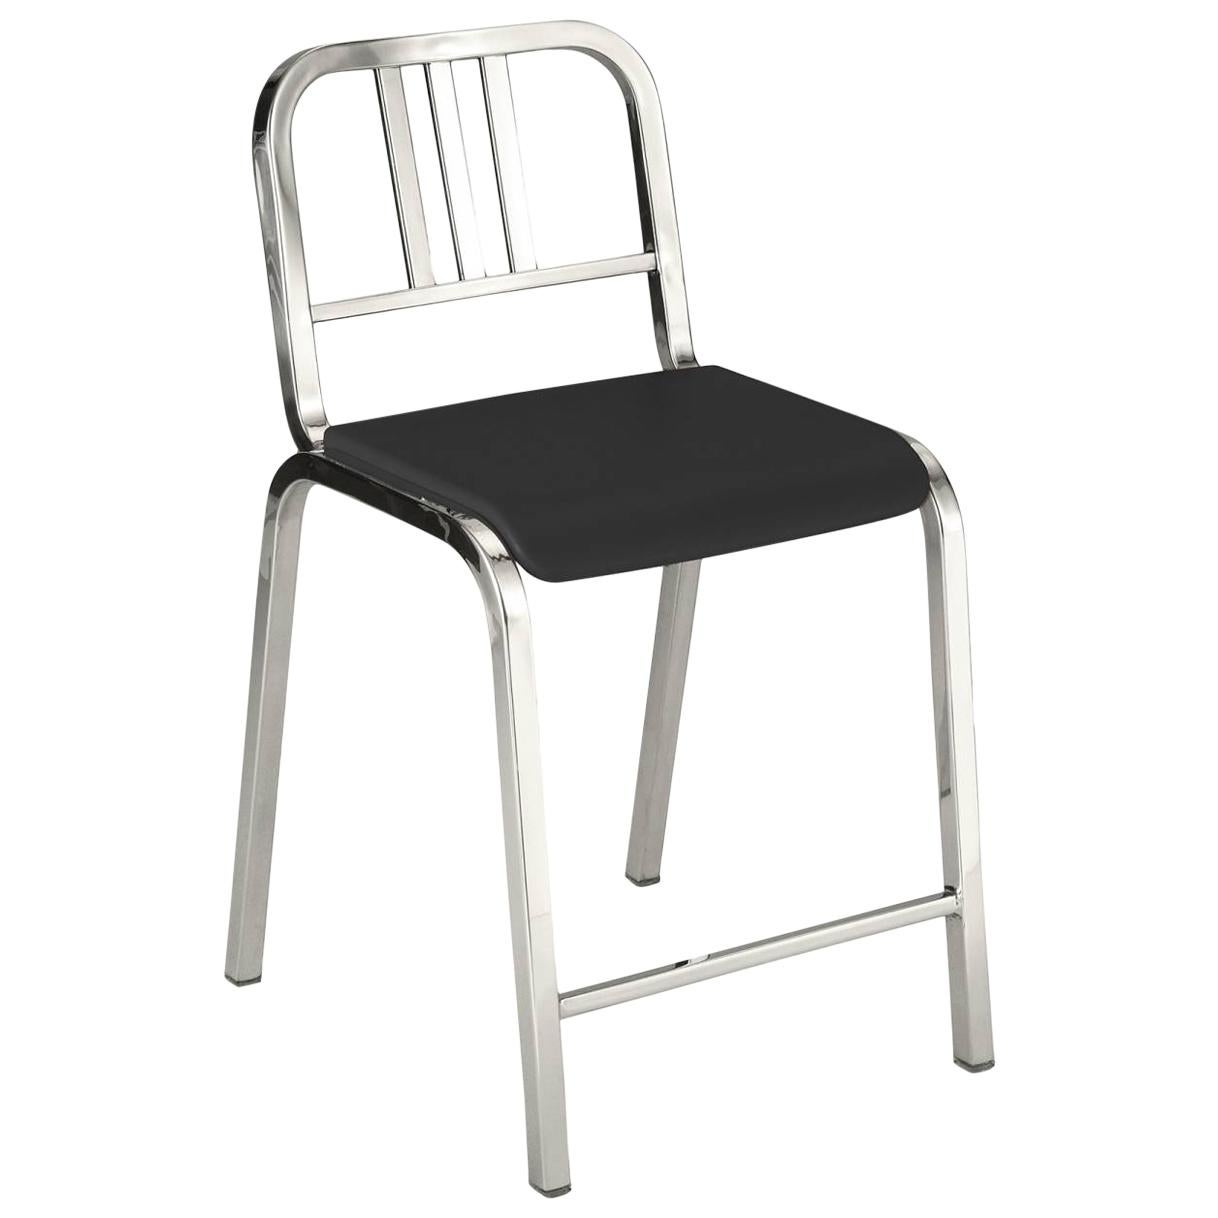 Emeco Nine-0™ Counter Stool in Polished Aluminum w/ Gray Seat by Ettore Sottsass